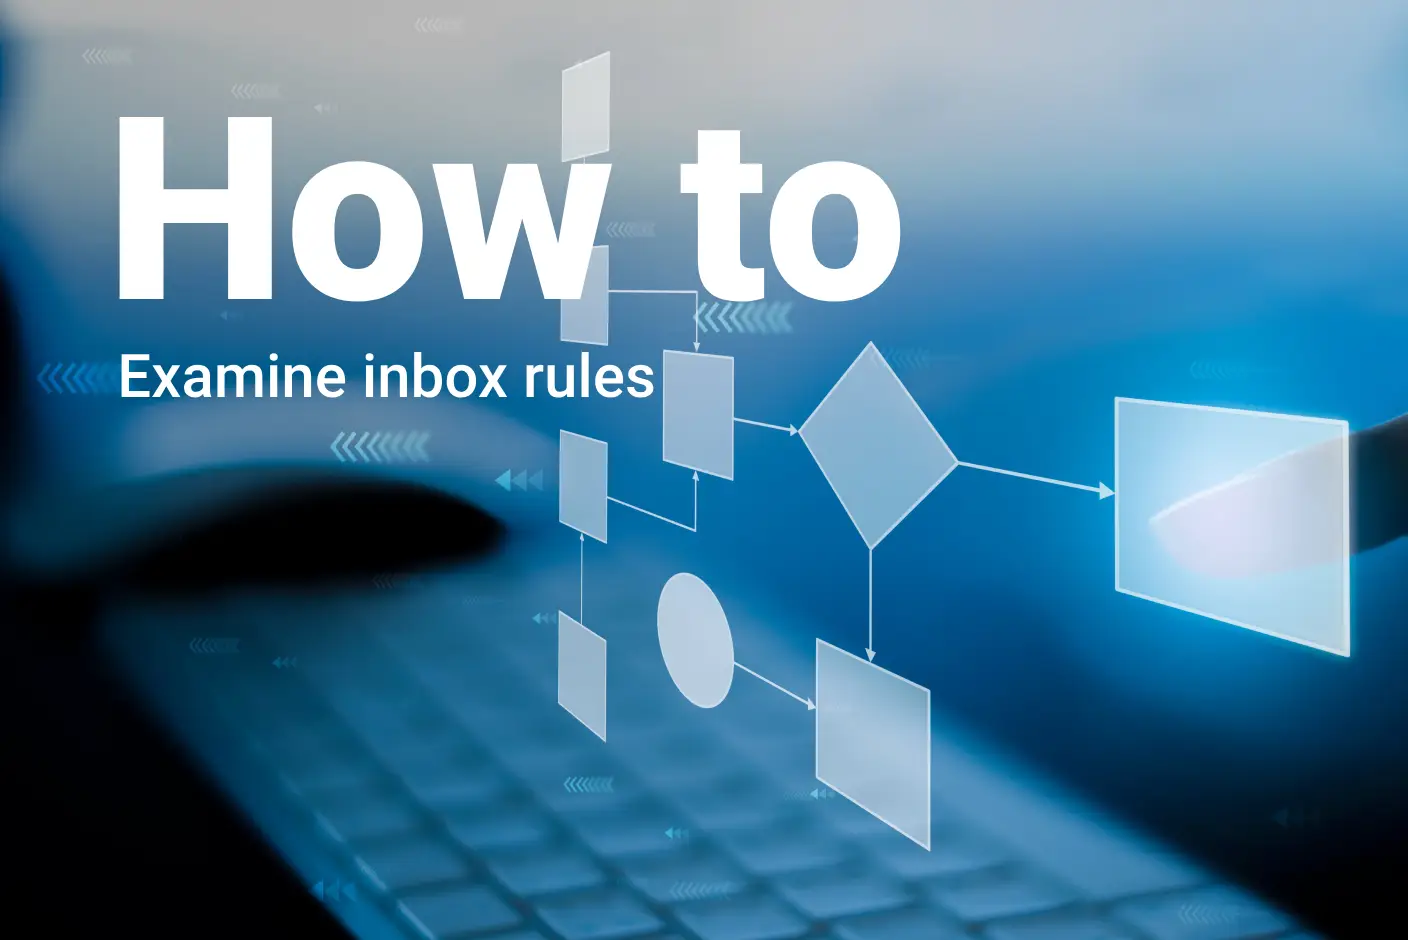 See and Examine Inbox Rules in Exchange Online